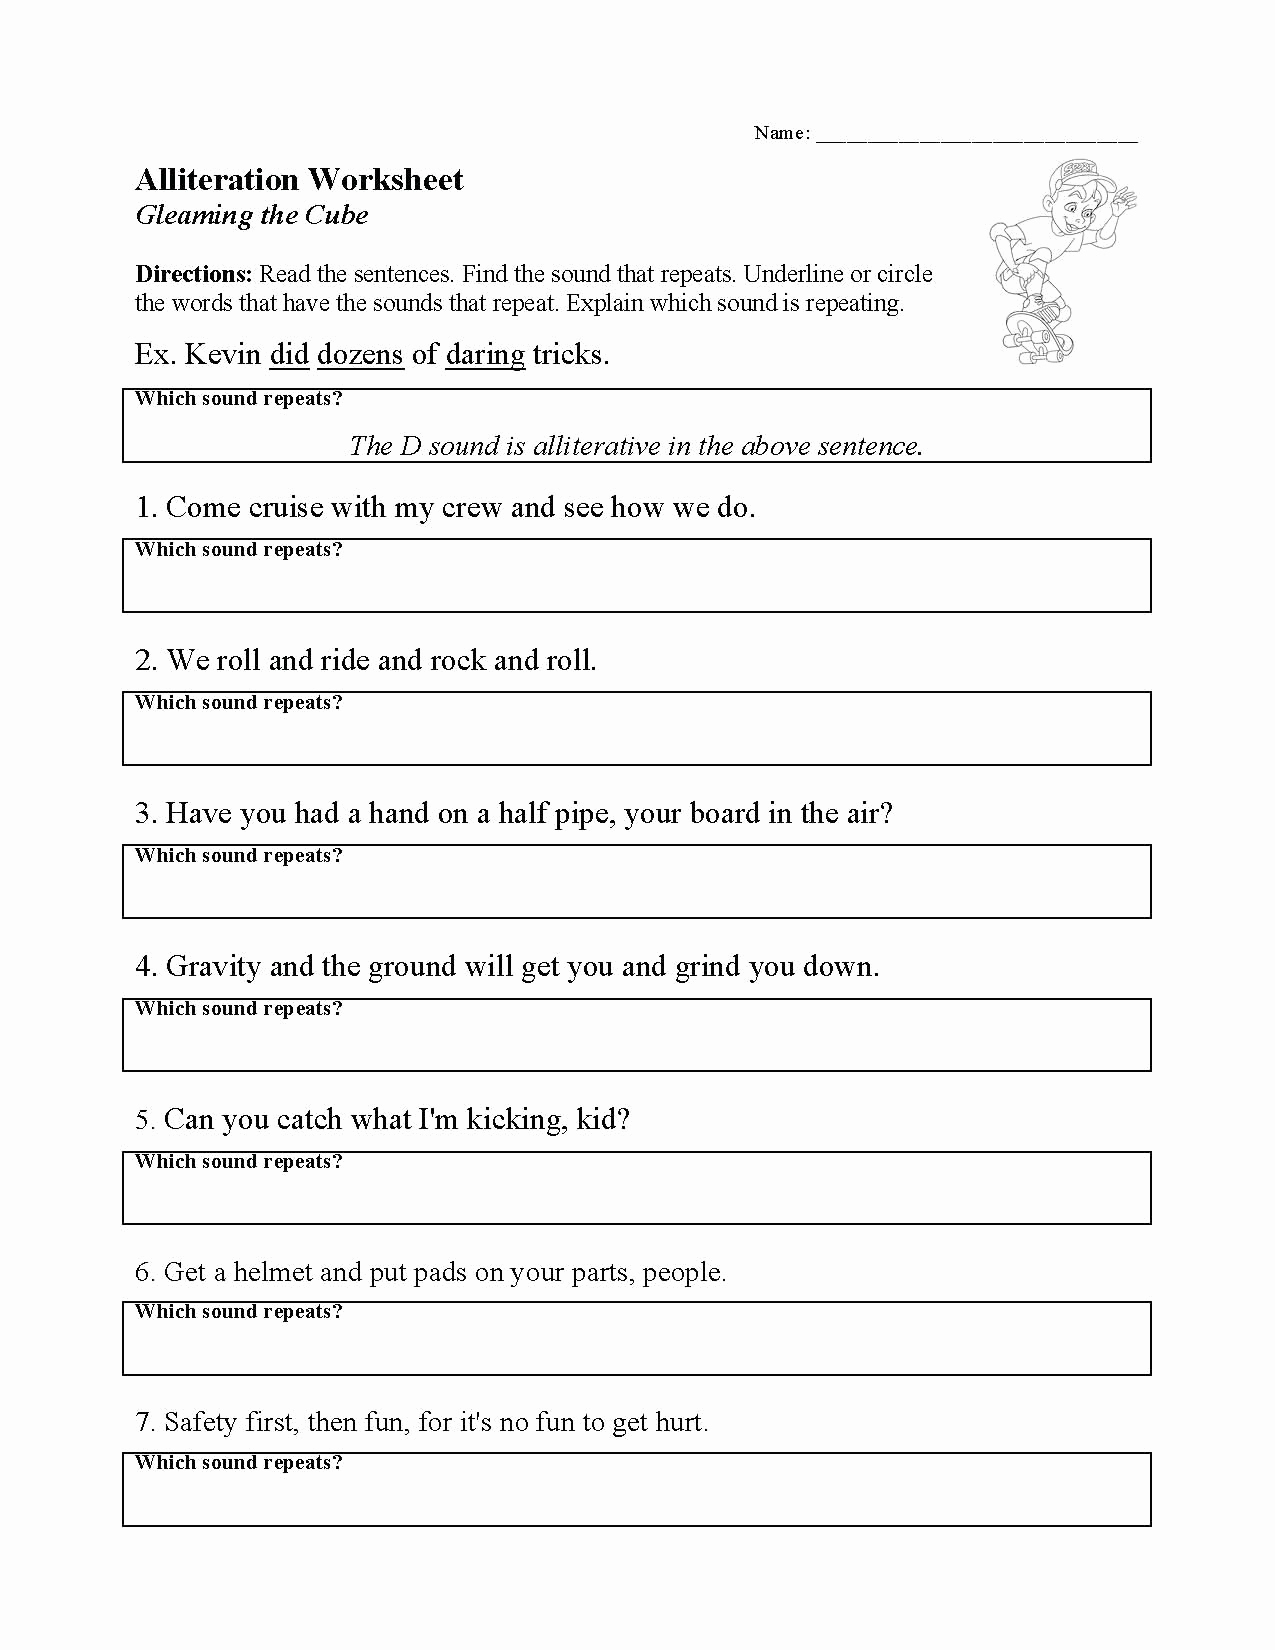 Alliteration Worksheets with Answers Best Of Alliteration Worksheet